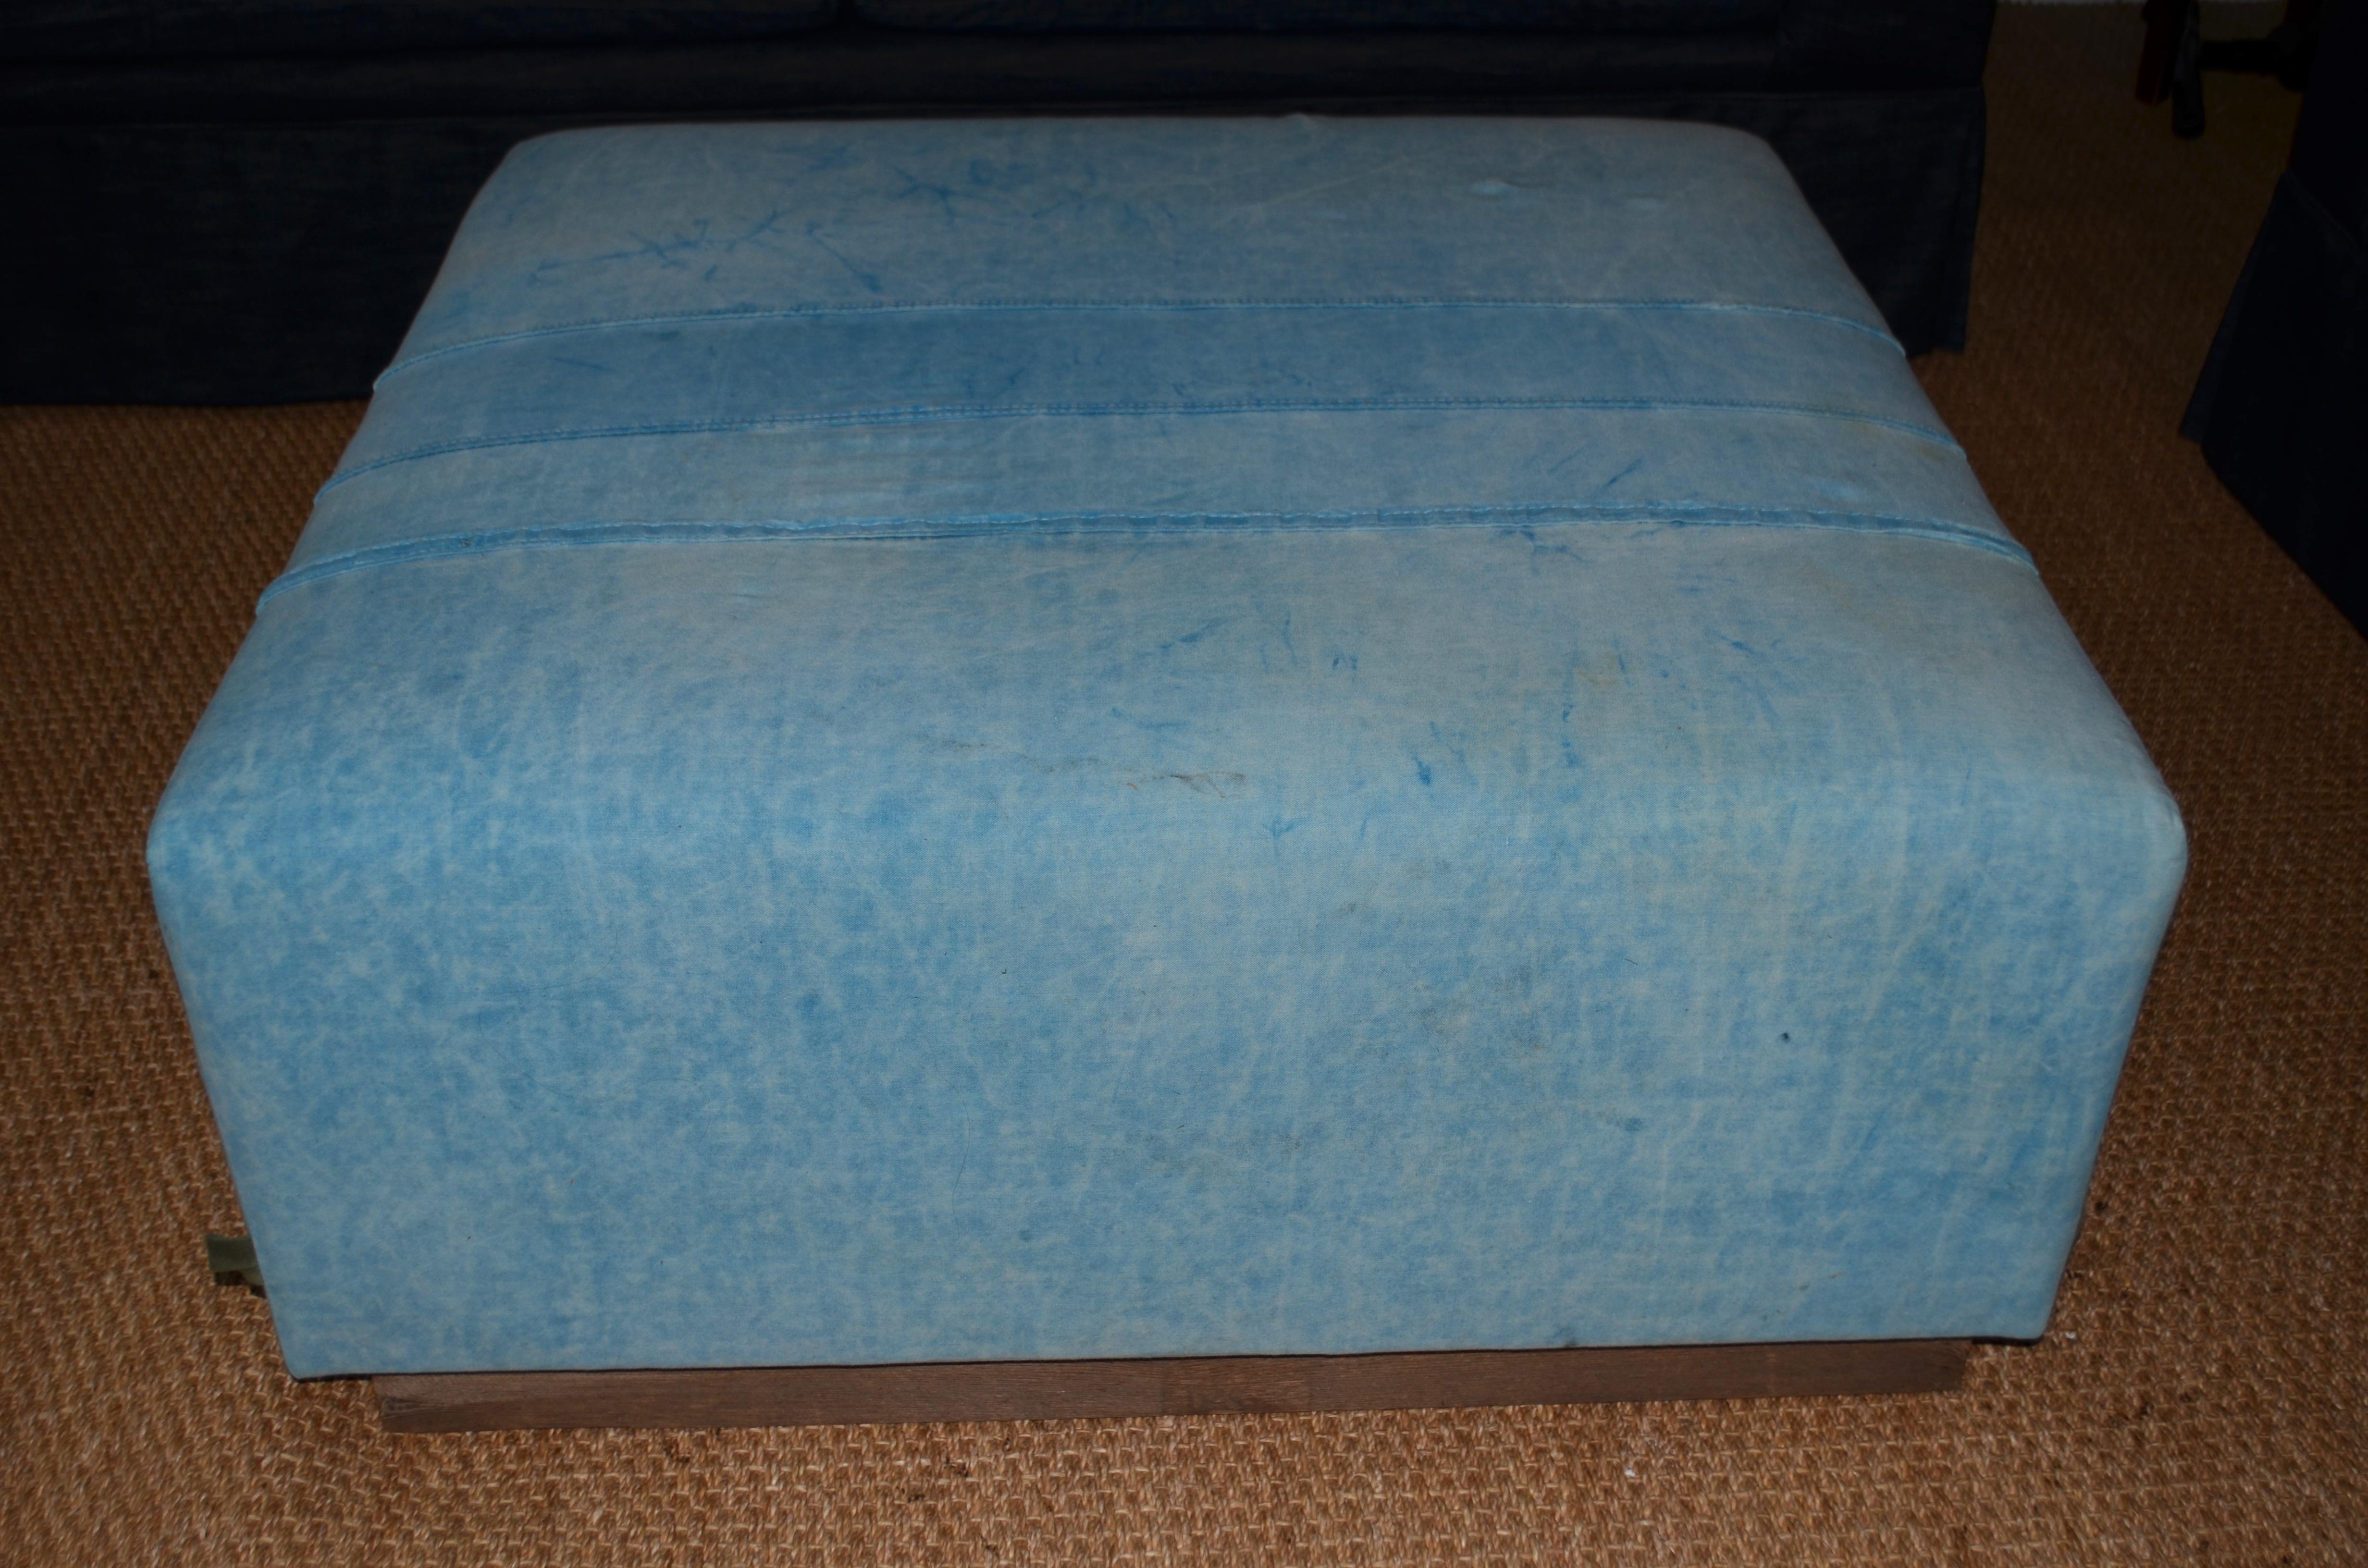 Ottoman upholstered in 1960s tent canvas. Sits sturdily atop handcrafted, 100-year old barn wood base, left in its natural weathered state. A sizable, sophisticated, room-presence piece. Sit on it, rest your feet upon it, spread a tablecloth and set